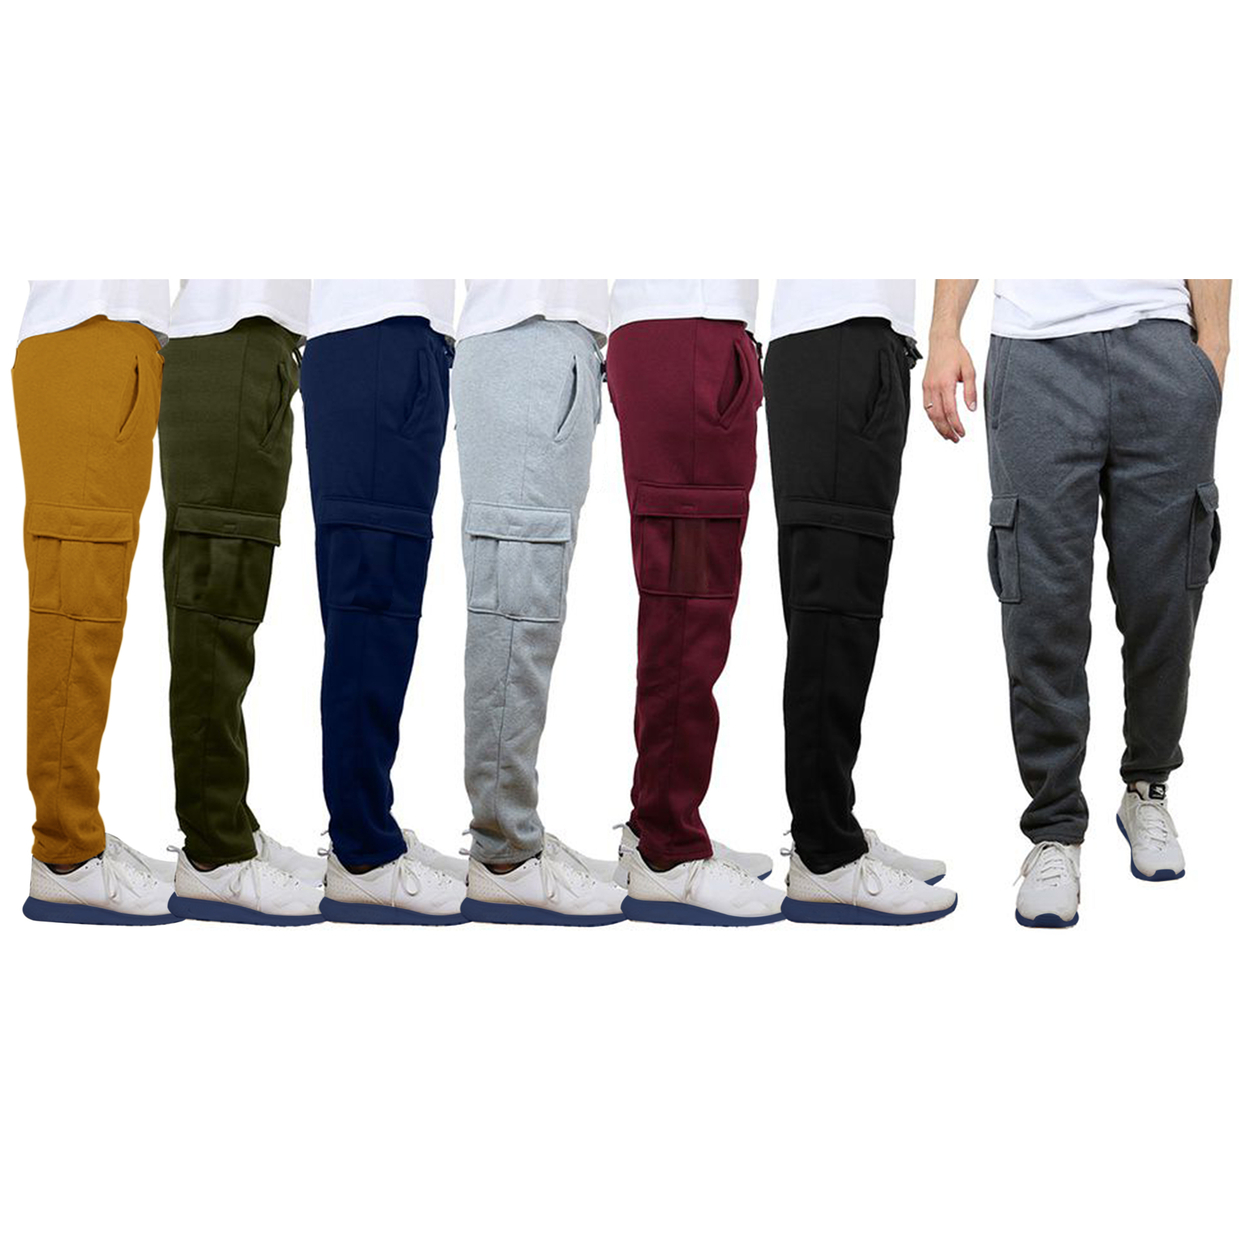 Multipack Men's Casual Solid Cargo Jogger Sweatpants With Pockets - 1, 2xl